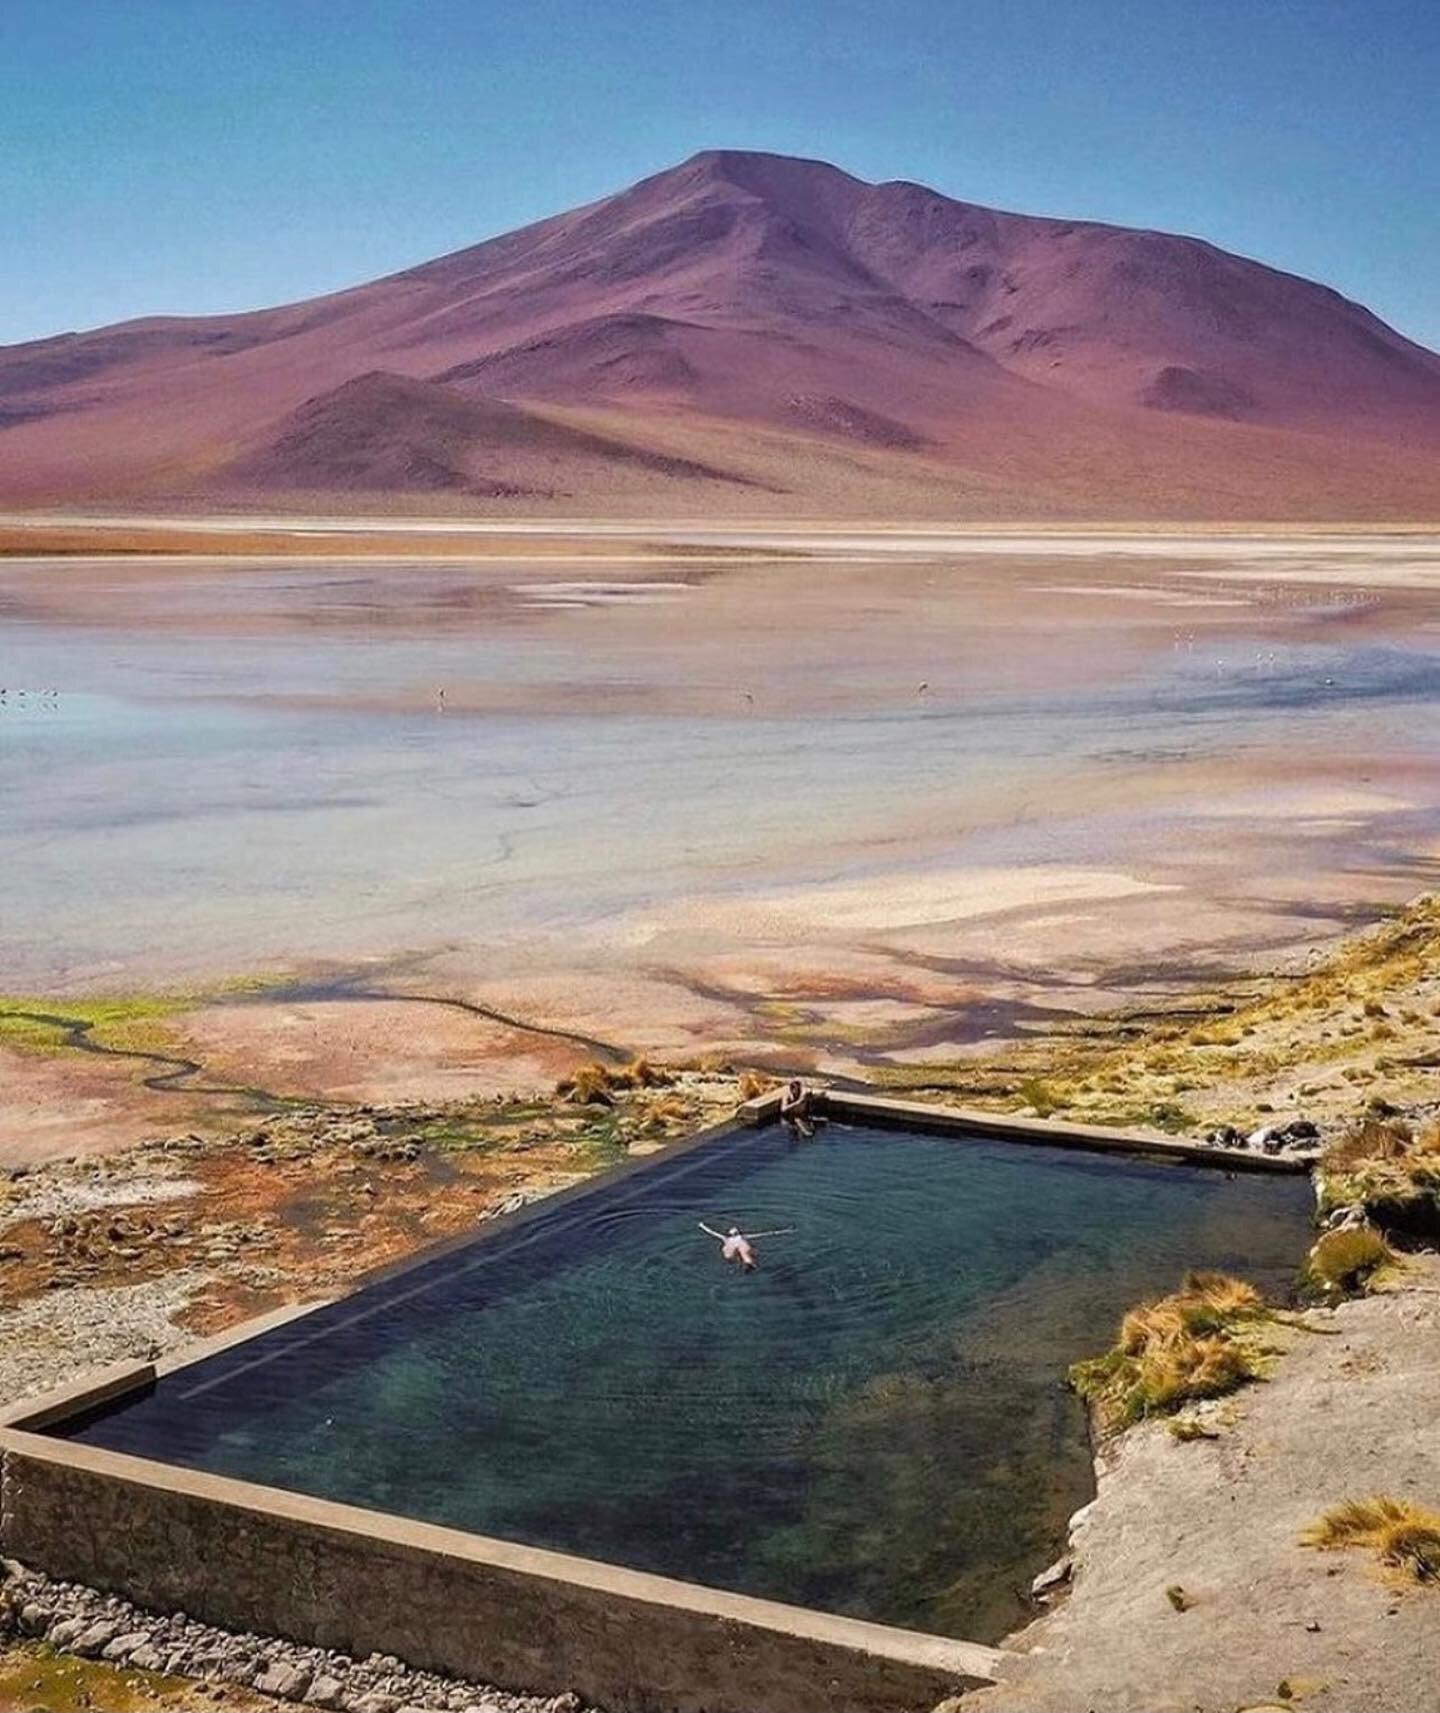 if you need to reach me....
Termas de Polques in the altiplano of central Bolivia, approximately 14,000 feet above sea level / photo by Roman Moran 
.
.
.
.
.
.
.
.
.
#termasdepolques #altiplano #travel #thermalhotsprings #bolivia #nature #kellybehun